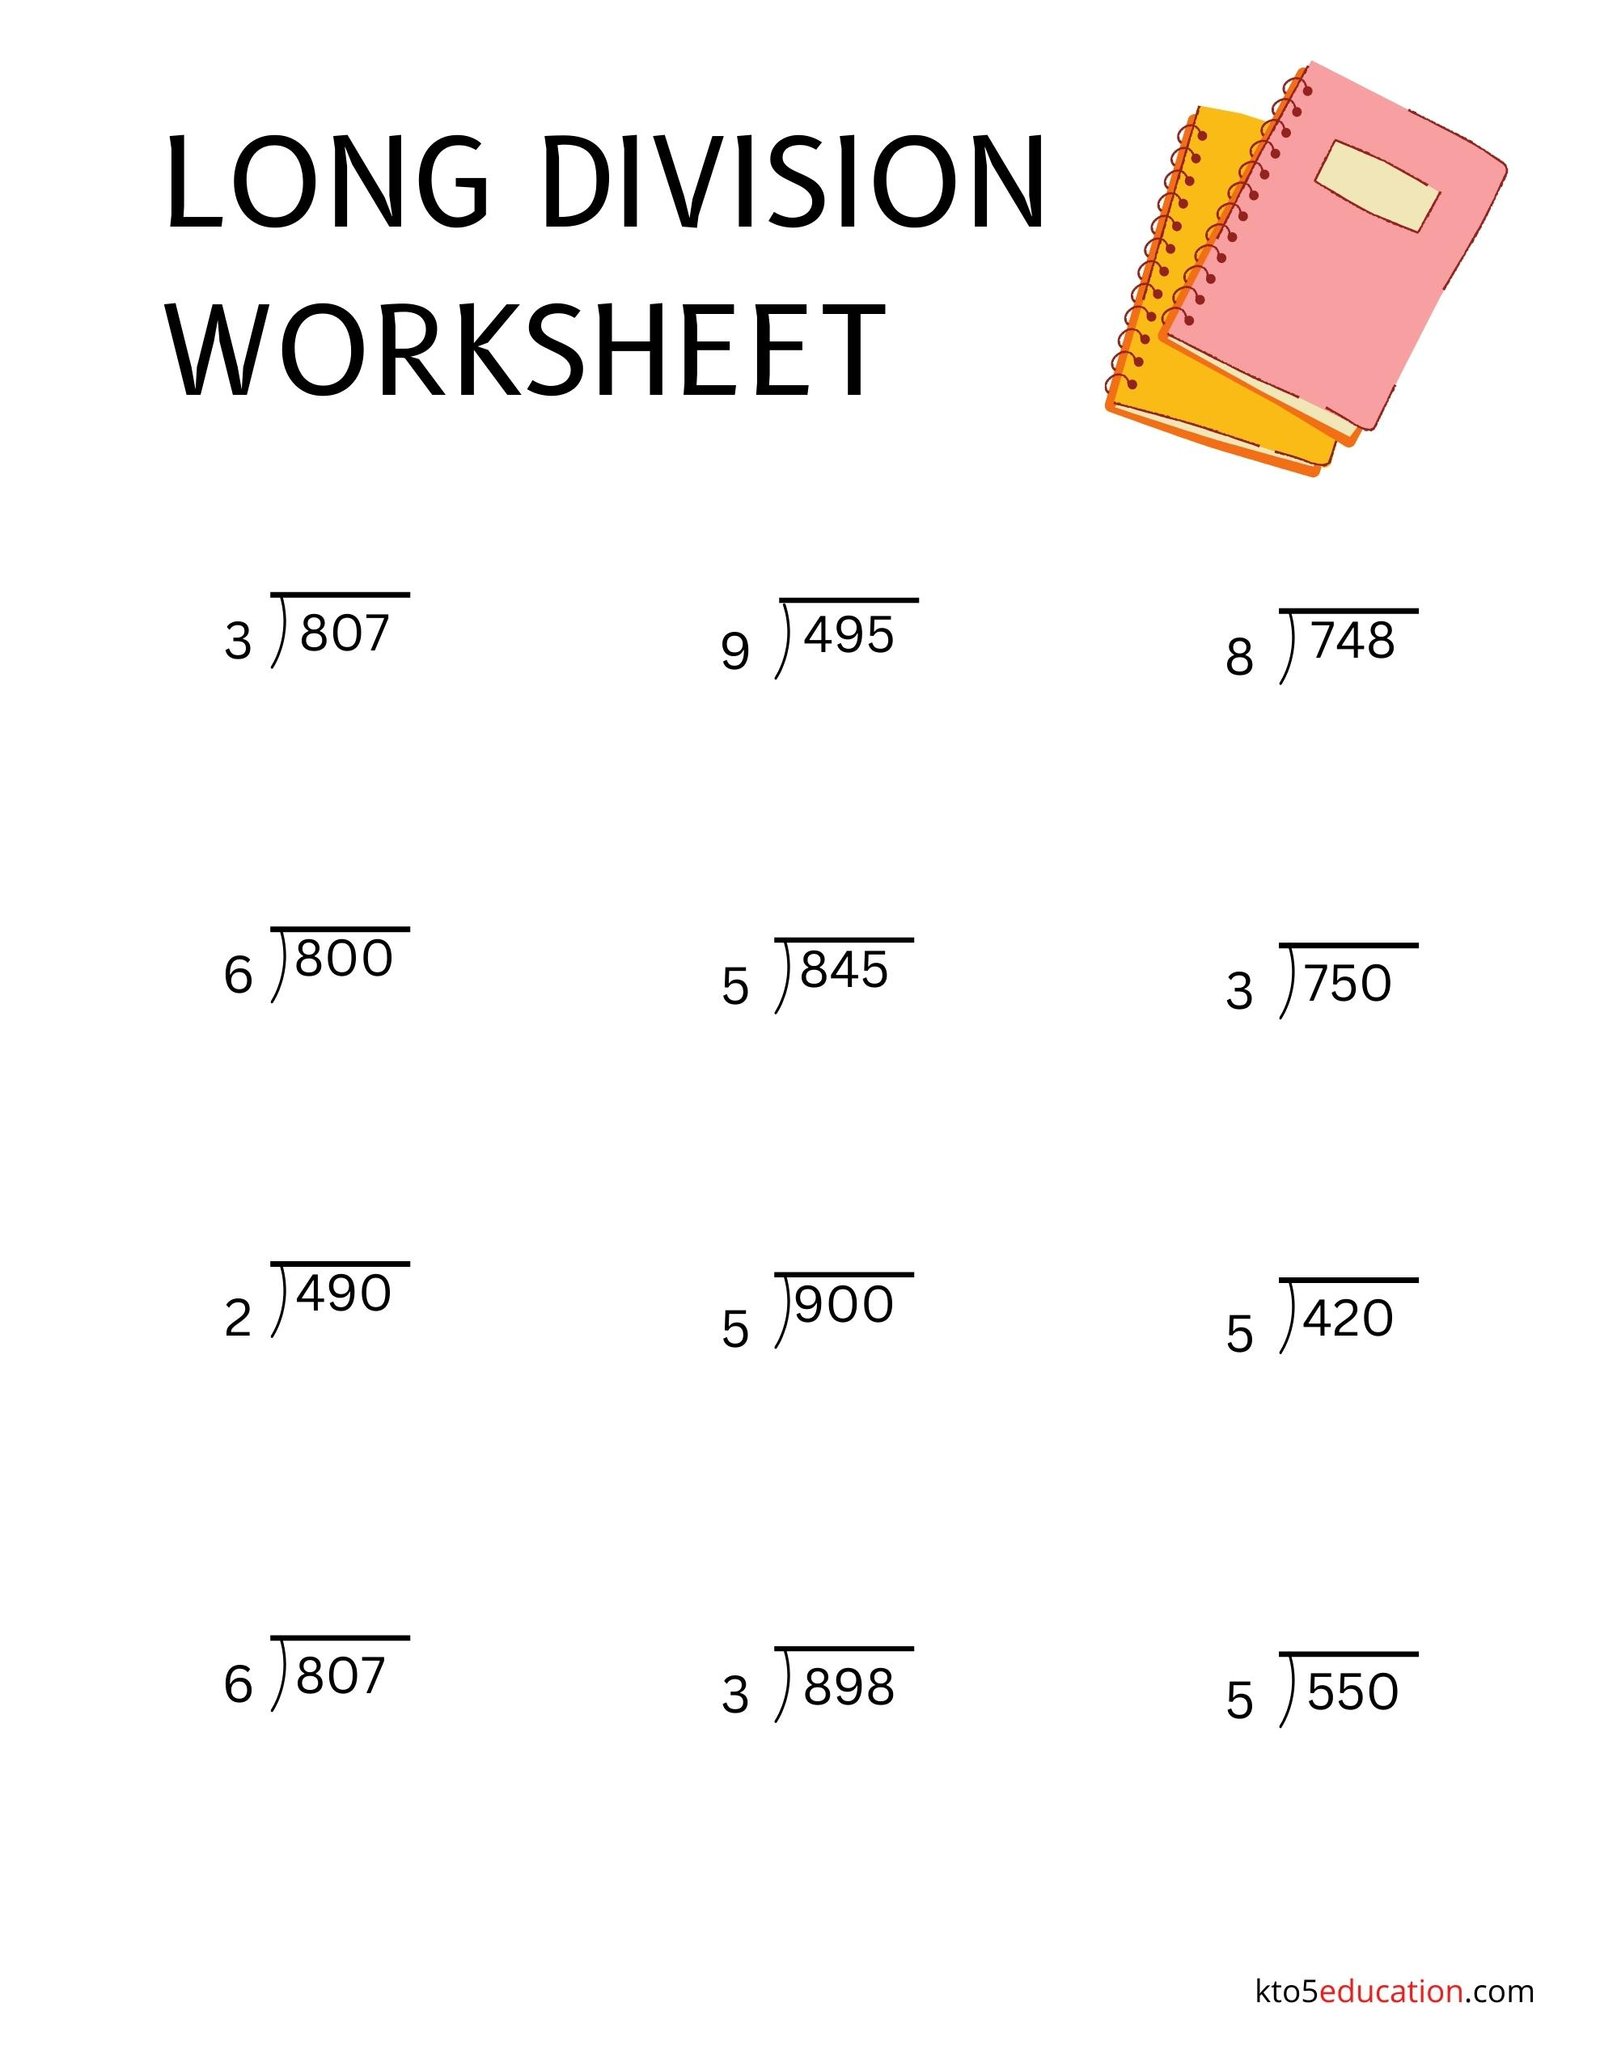 Long Division Worksheets For 6th Graders